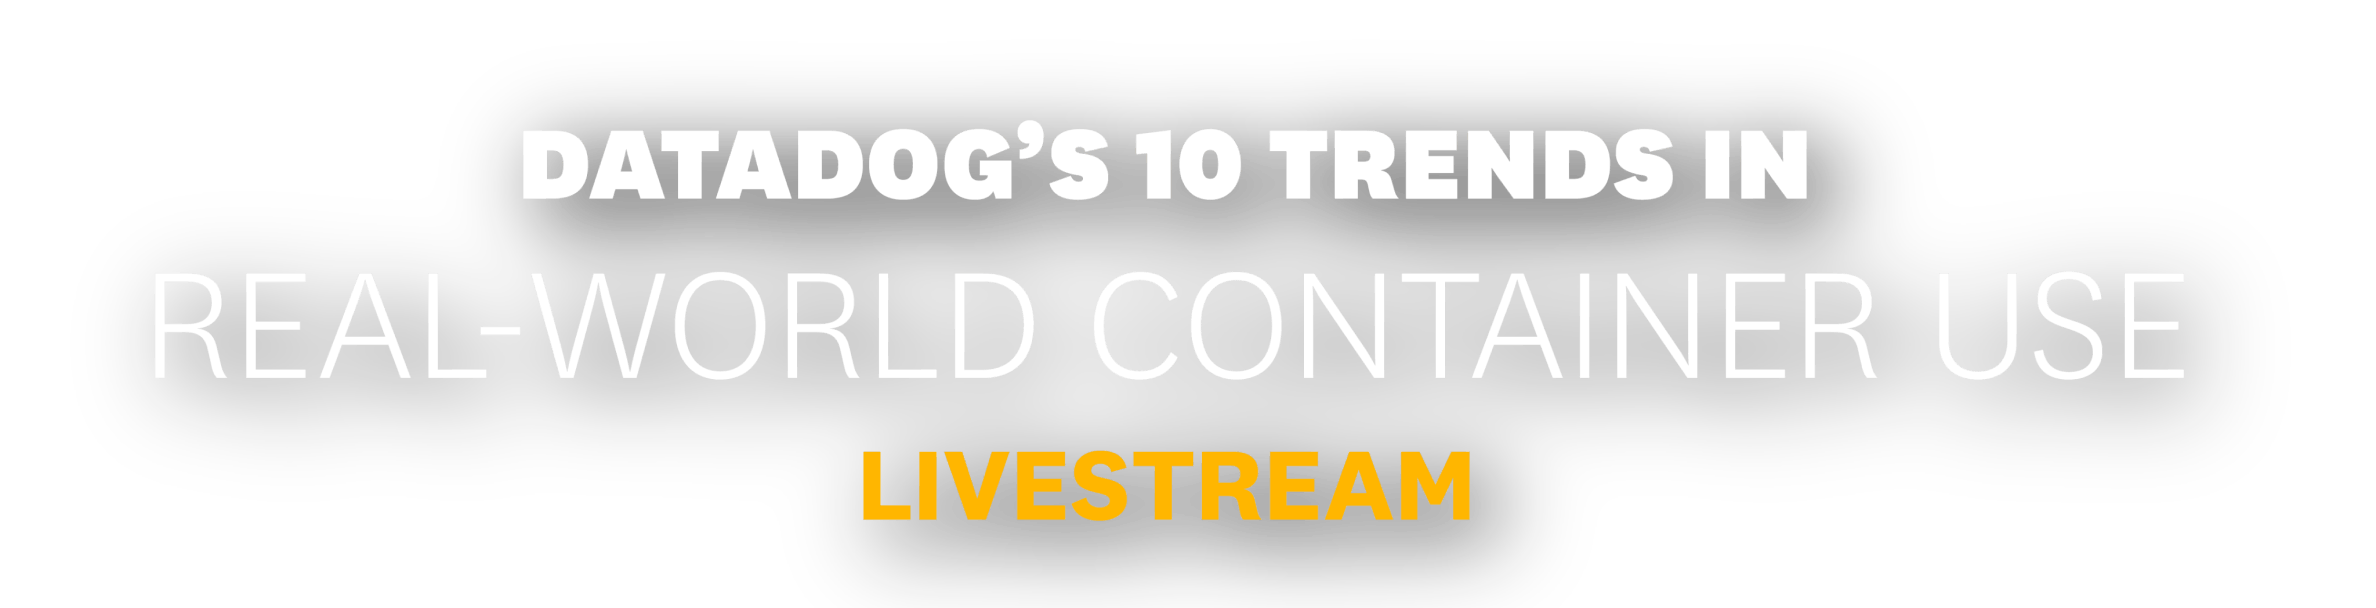 10 Trends in Real-Word Container Use Livestream header image